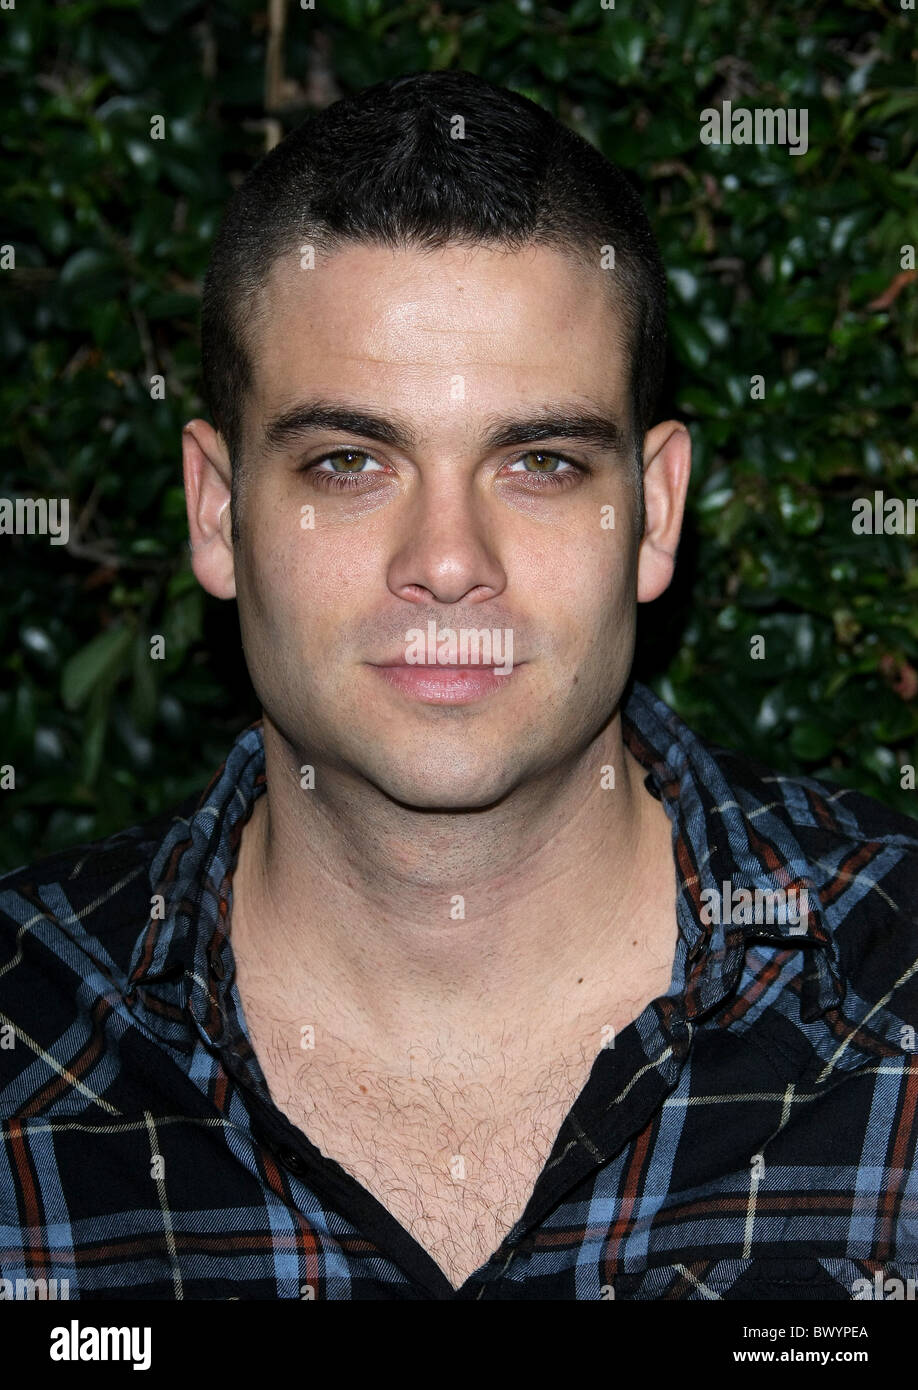 MARK SALLING ROLLING STONE MAGAZINE héberge 2010 AMERICAN MUSIC AWARDS AFTER PARTY VIP HOLLYWOOD LOS ANGELES CALIFORNIA USA Banque D'Images